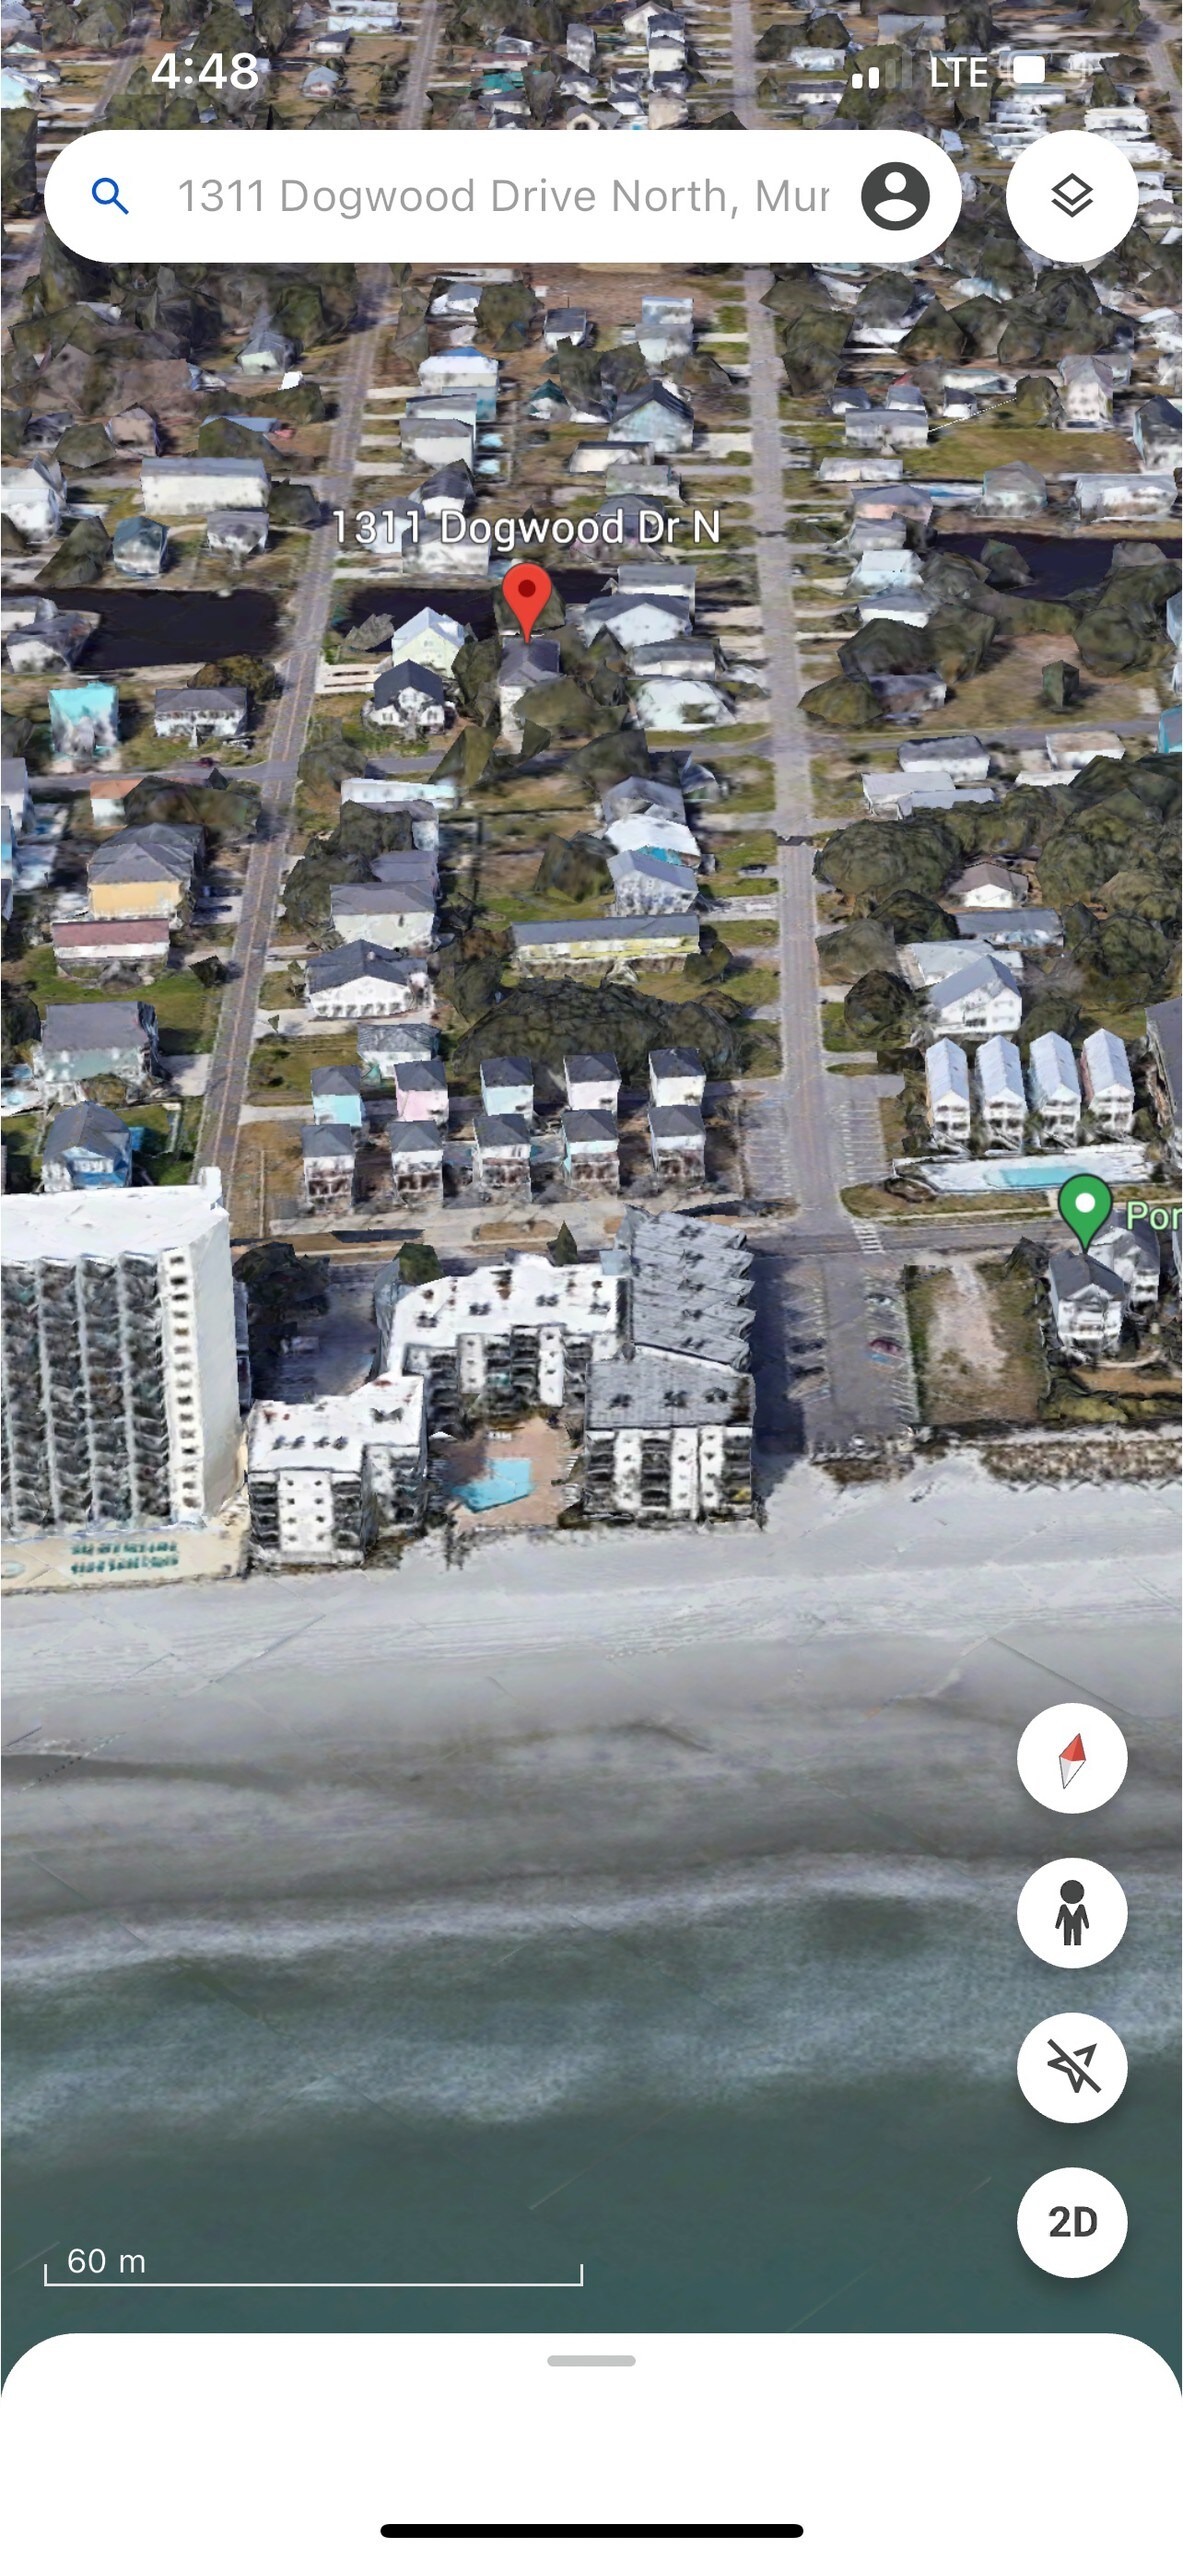 12bd, 1000ft to Beach, Pool!